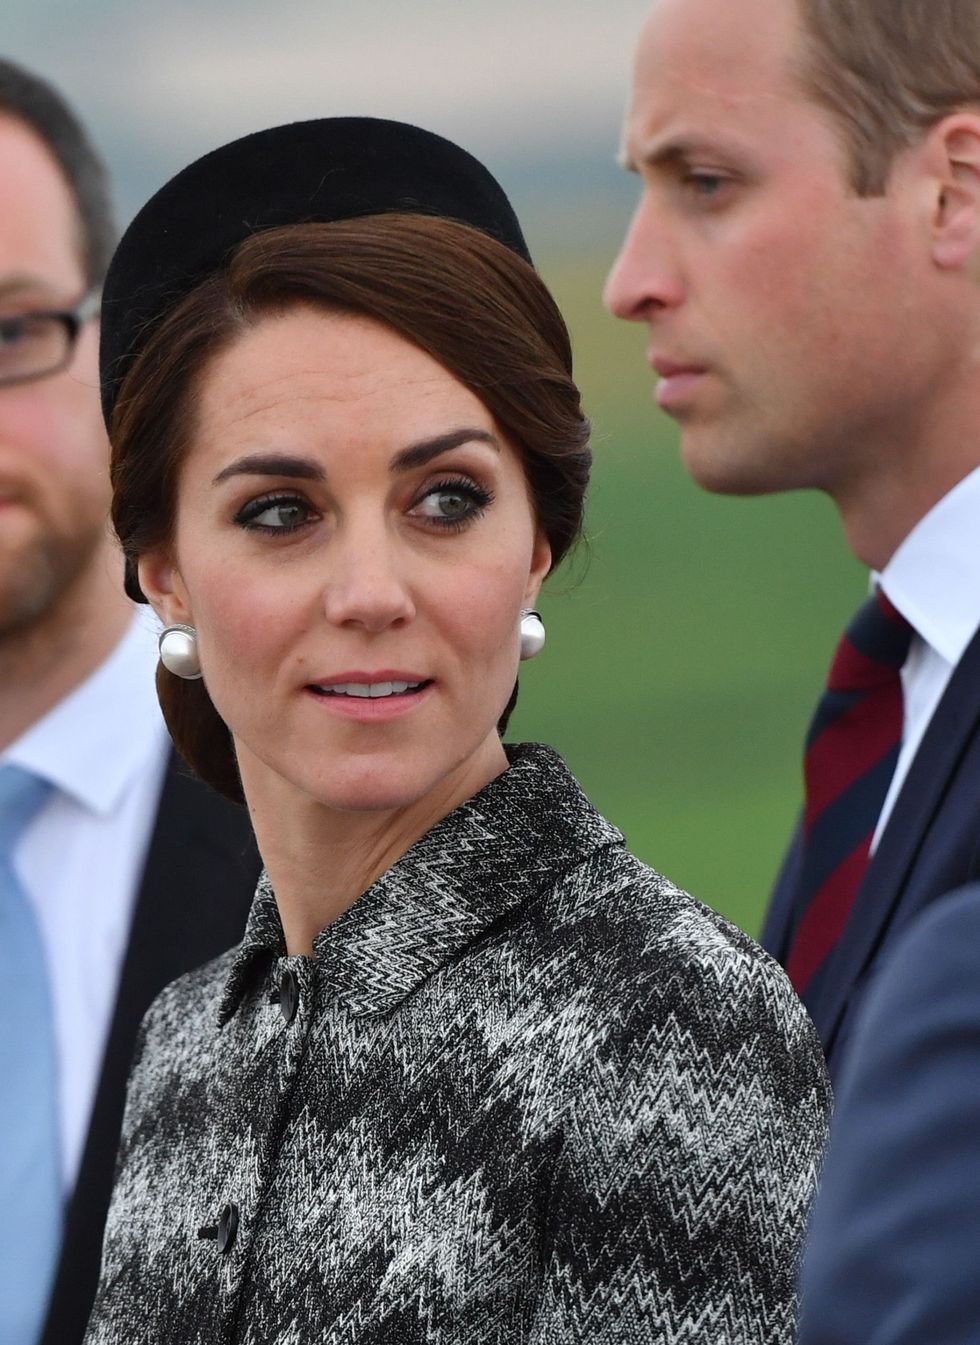 THIEPVAL, FRANCE - JUNE 30:  Catherine, Duchess of Cambridge attends the Somme Centenary commemorations at the Thiepval Memorial on June 30, 2016 in Thiepval, France.  (Photo by Pool/Samir Hussein/WireImage)